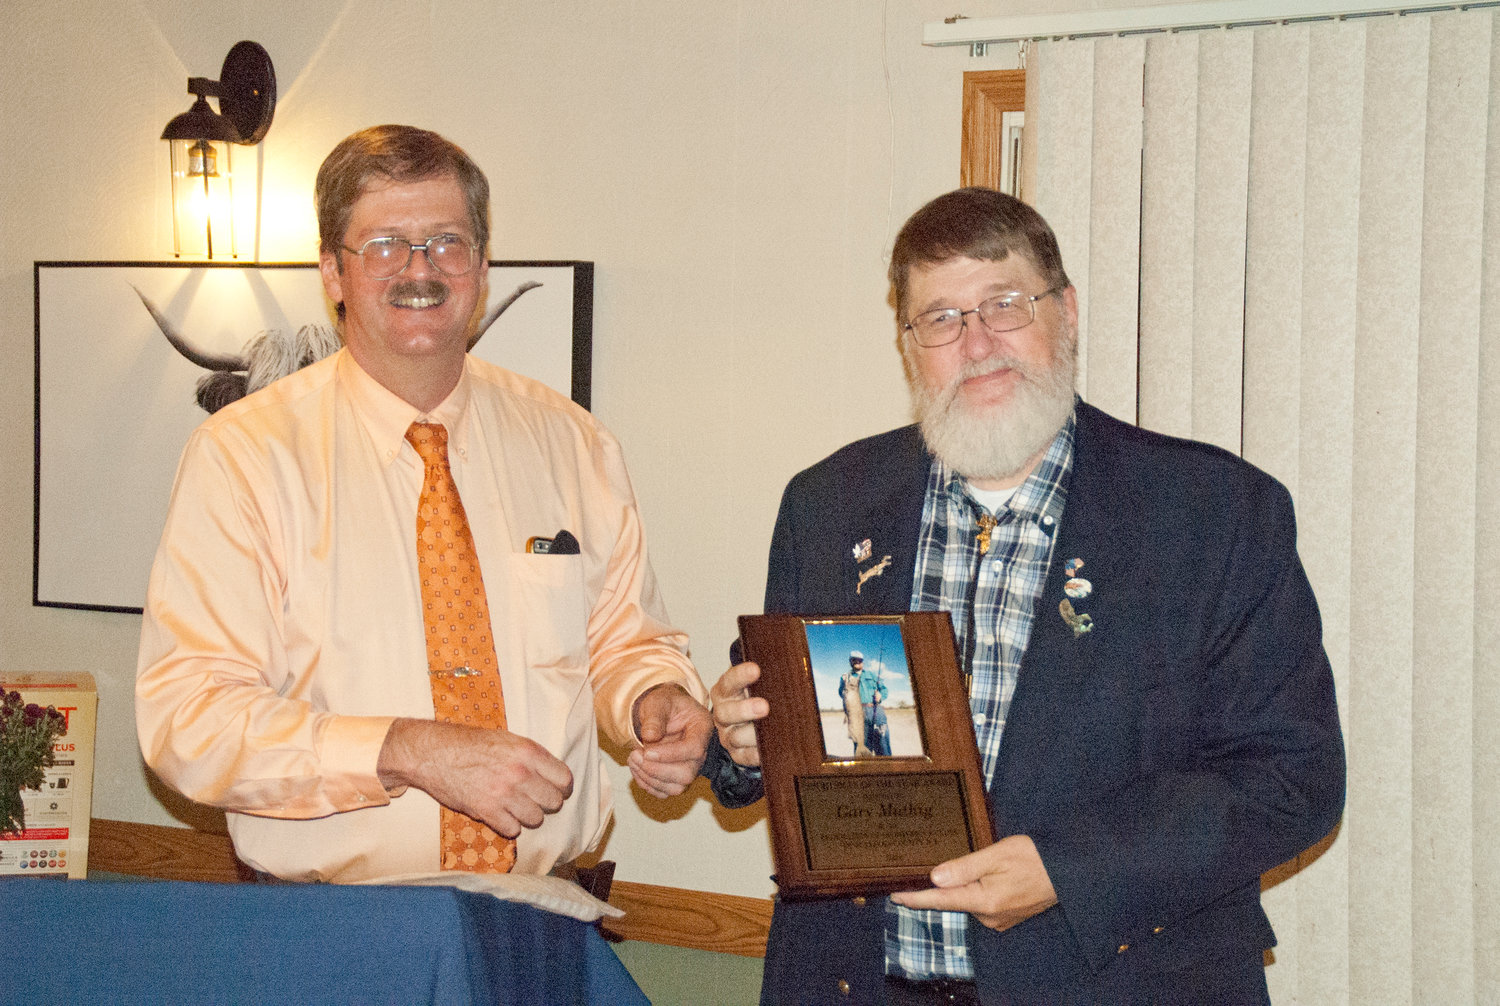 Federation President John Van Etten (Left) presents Sportsman of the Year winner Gary Muthig with the award at their annual dinner at the Rockland House.